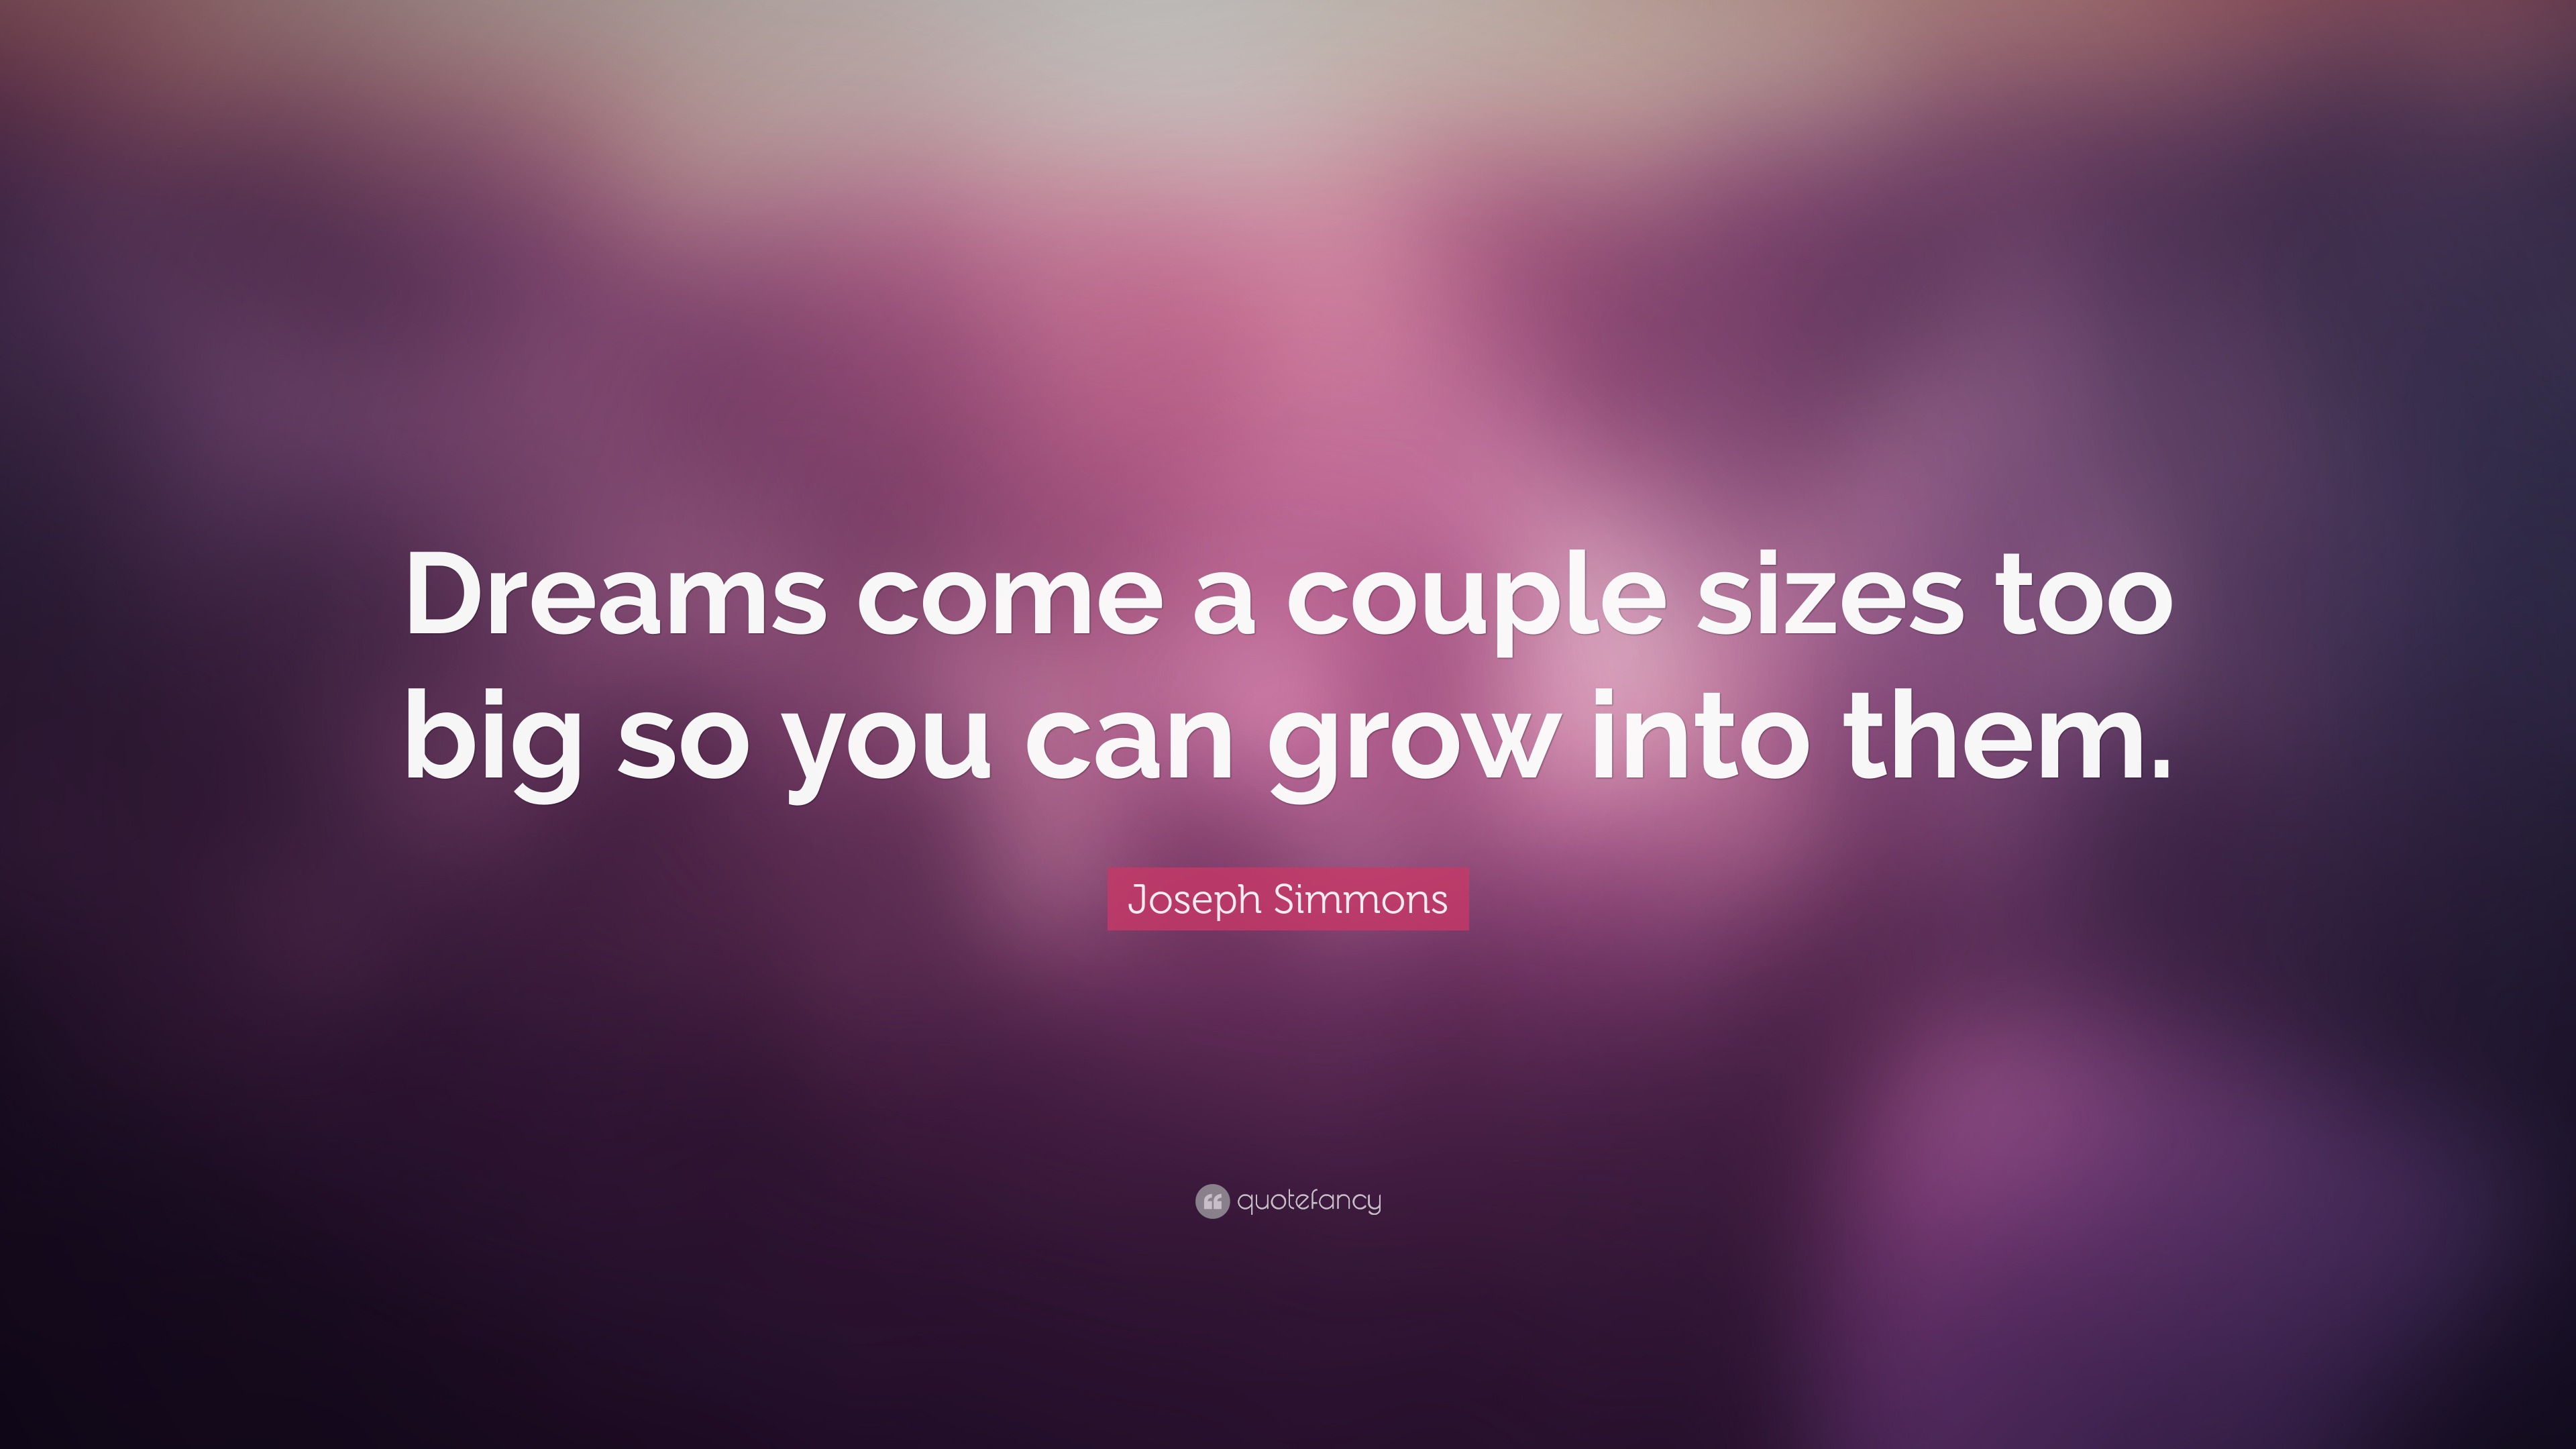 Joseph Simmons Quote: “Dreams come a couple sizes too big so you